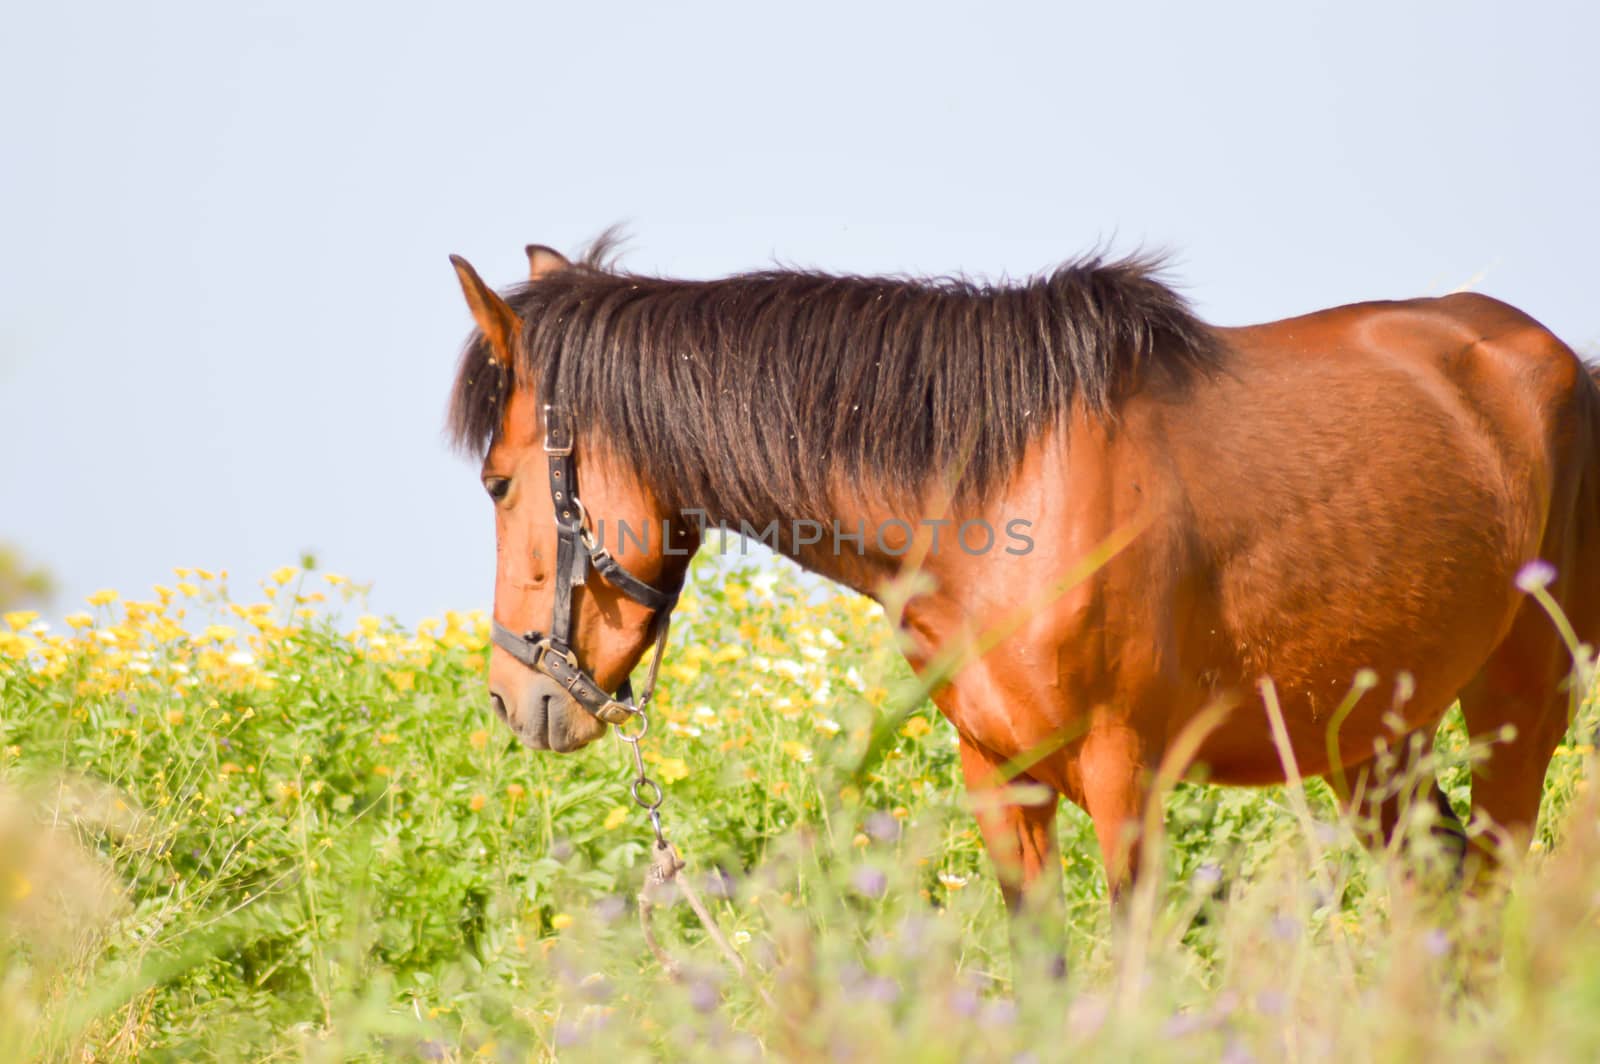 Brown horse in a meadow filled with daisies on the island of Crete